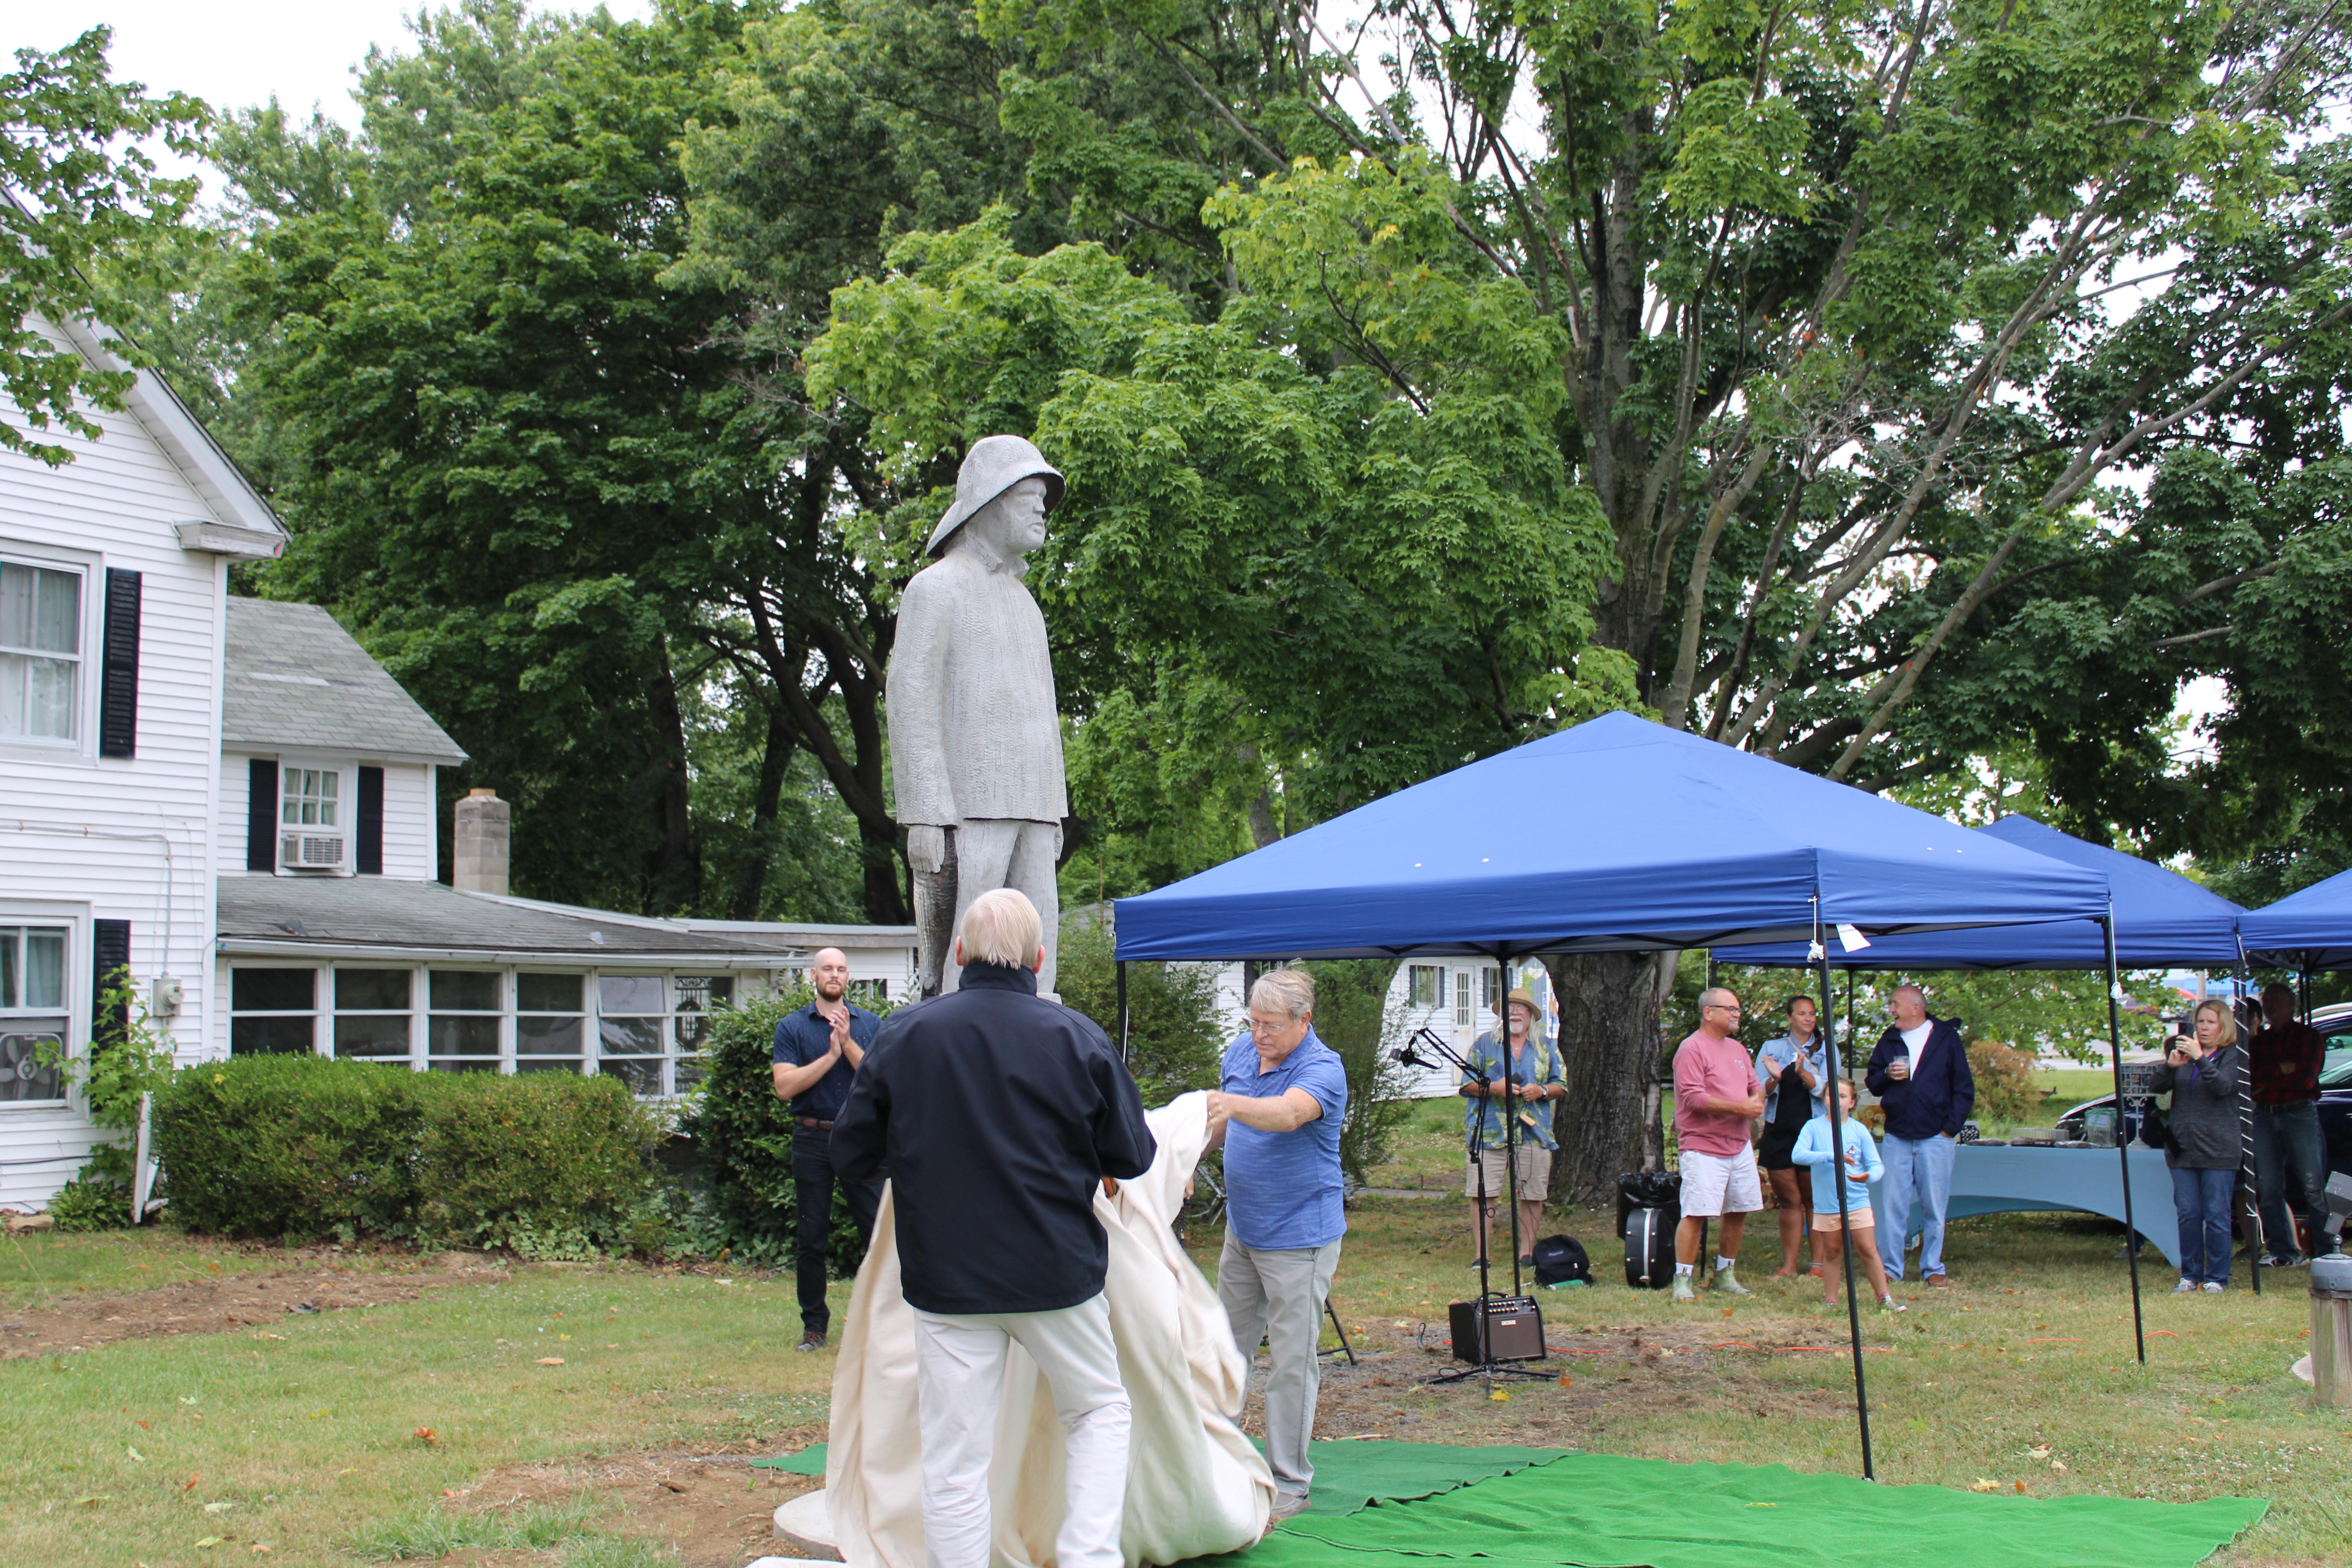 The Restored Old Salt is unveiled by Ron Fithian and the restoration artist Ron Elburn